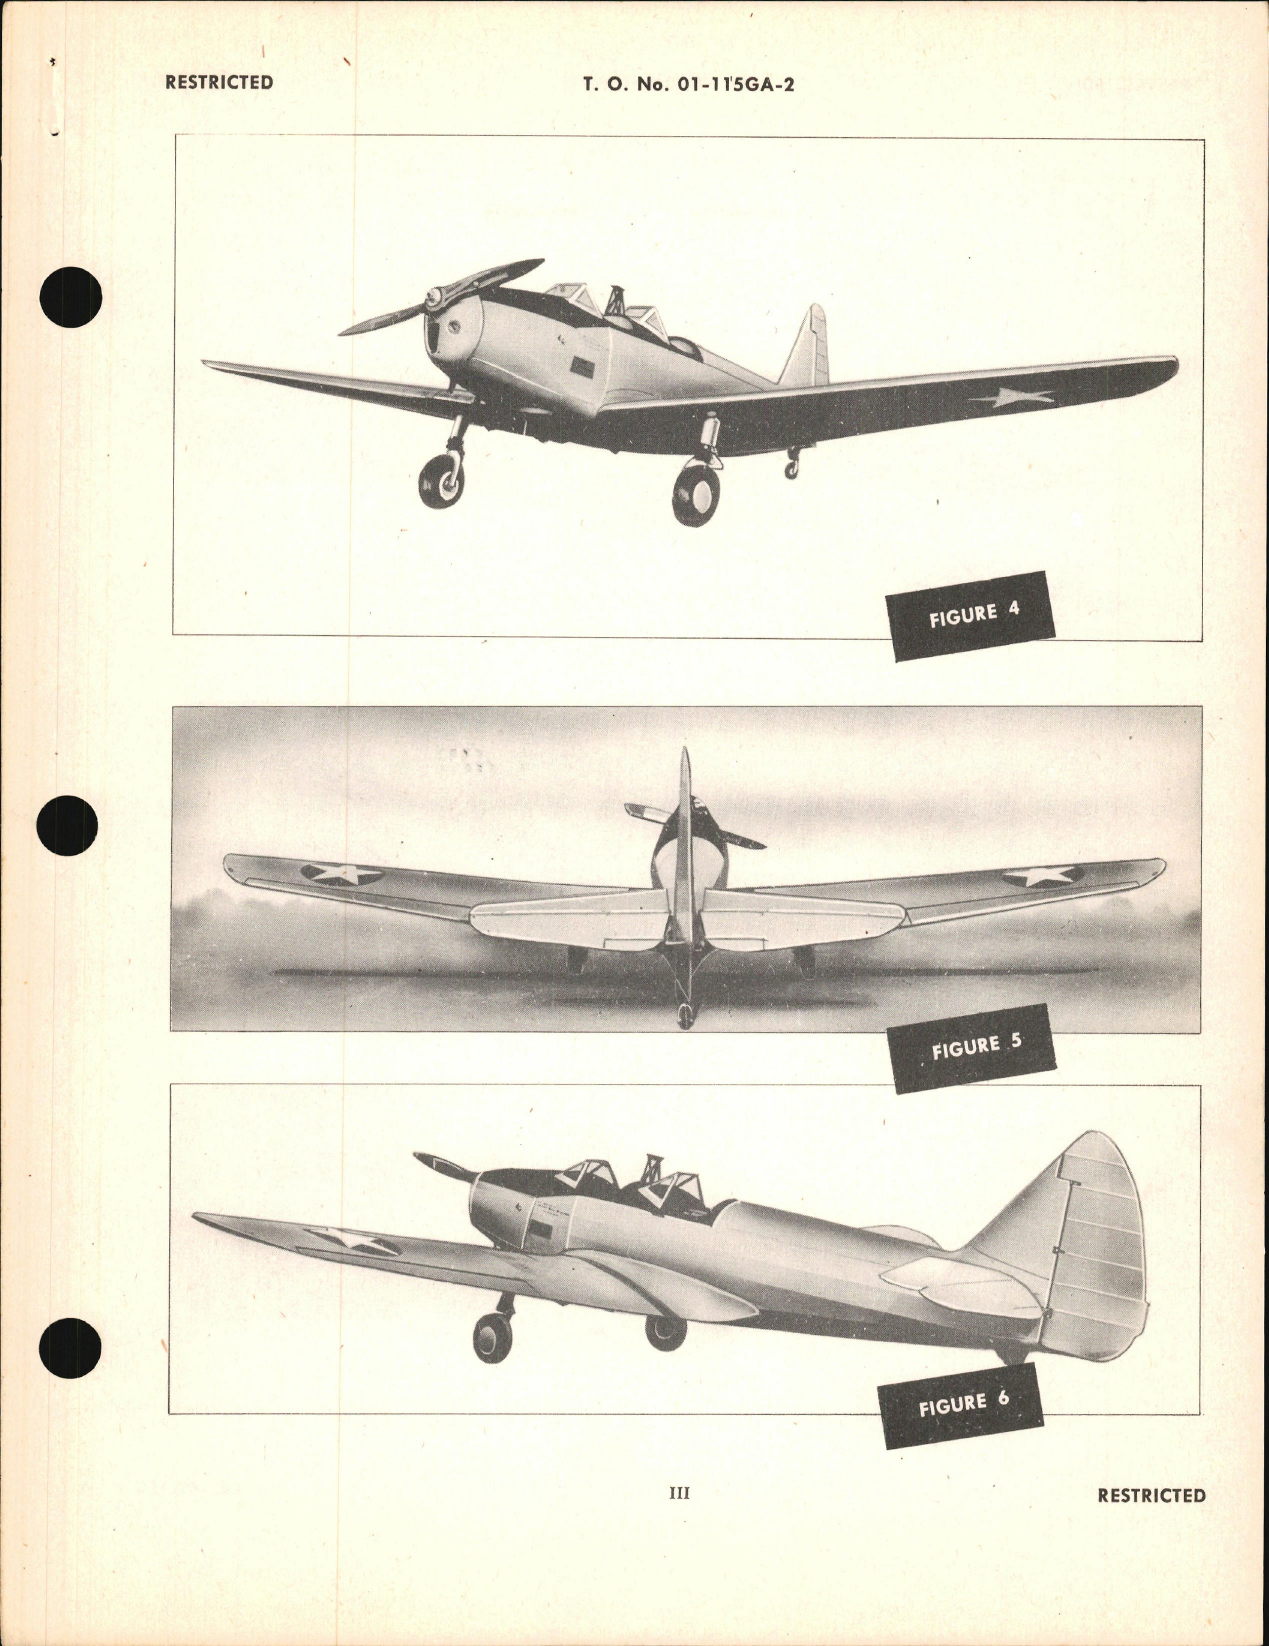 Sample page 5 from AirCorps Library document: Erection and Maintenance Instructions for PT-19, A, B, PT-23, and -26